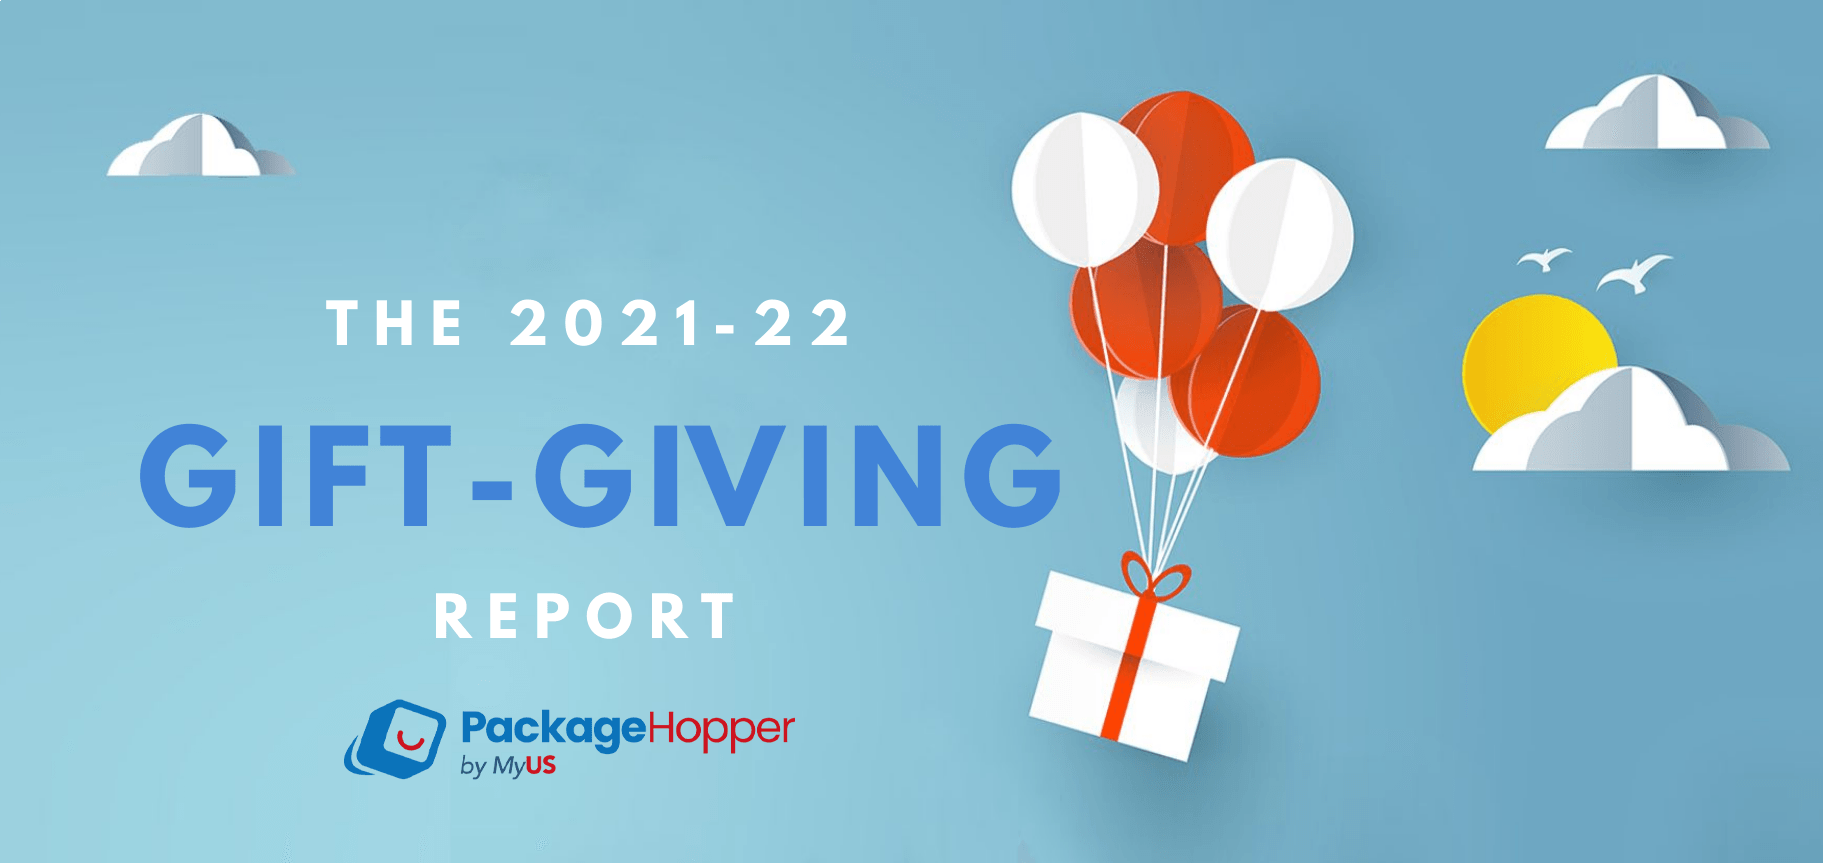 The 2021-22 Gift-Giving Report